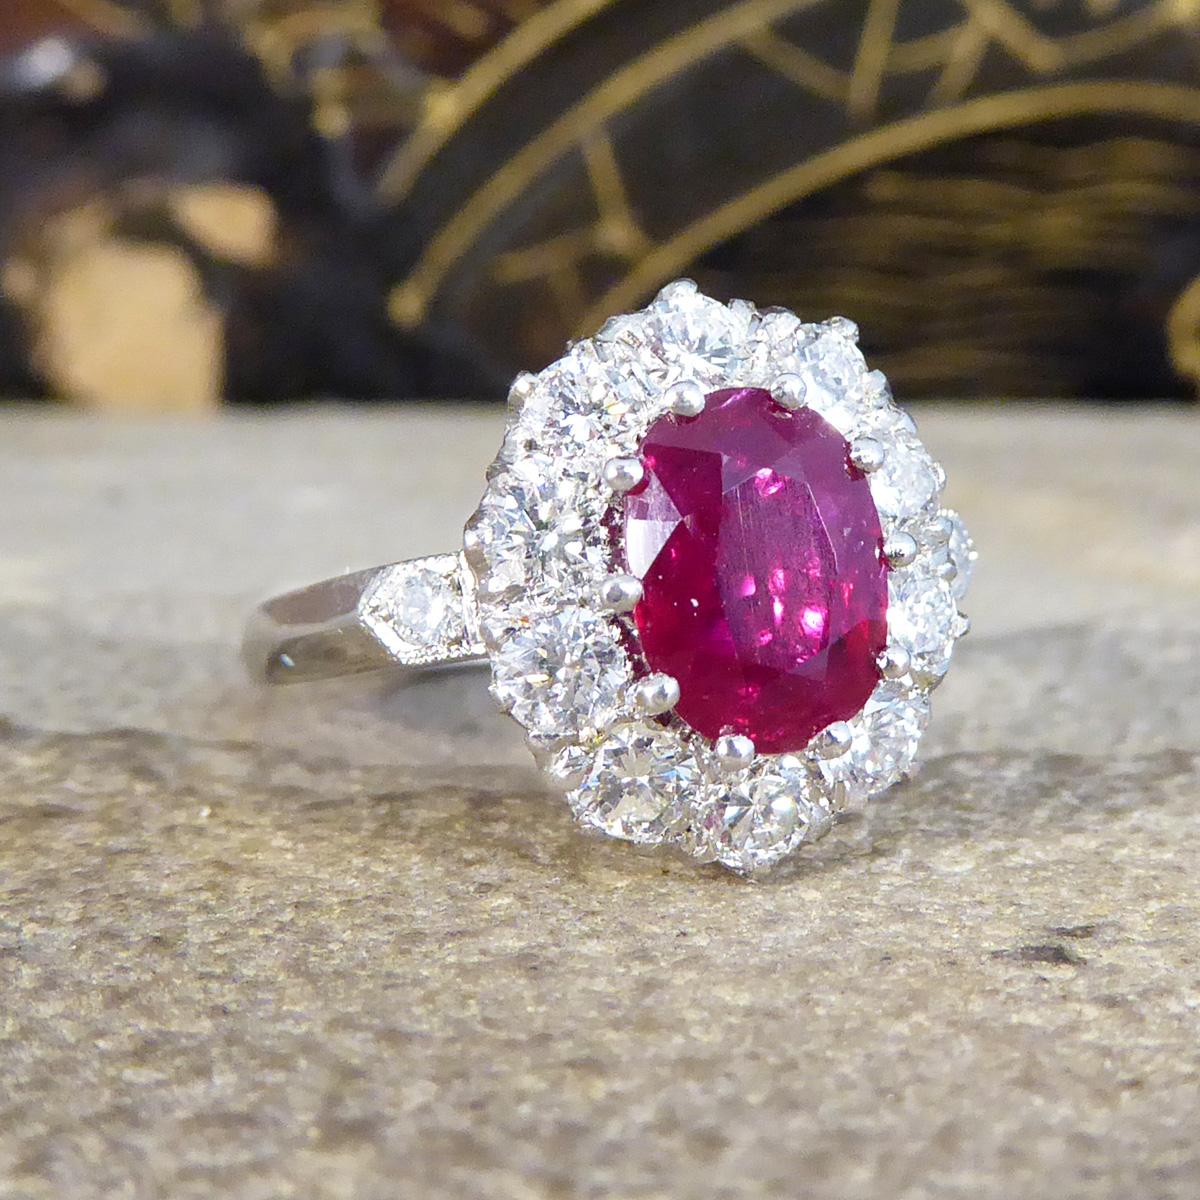 This contemporary ring has been crafted with a 1.28ct stunning deep red Ruby in the centre with a surround of 10 Brilliant Cut Diamonds weighing a total of 0.95ct. The Ruby itself has a deep red colour to it with brighter reds and pinks coming out